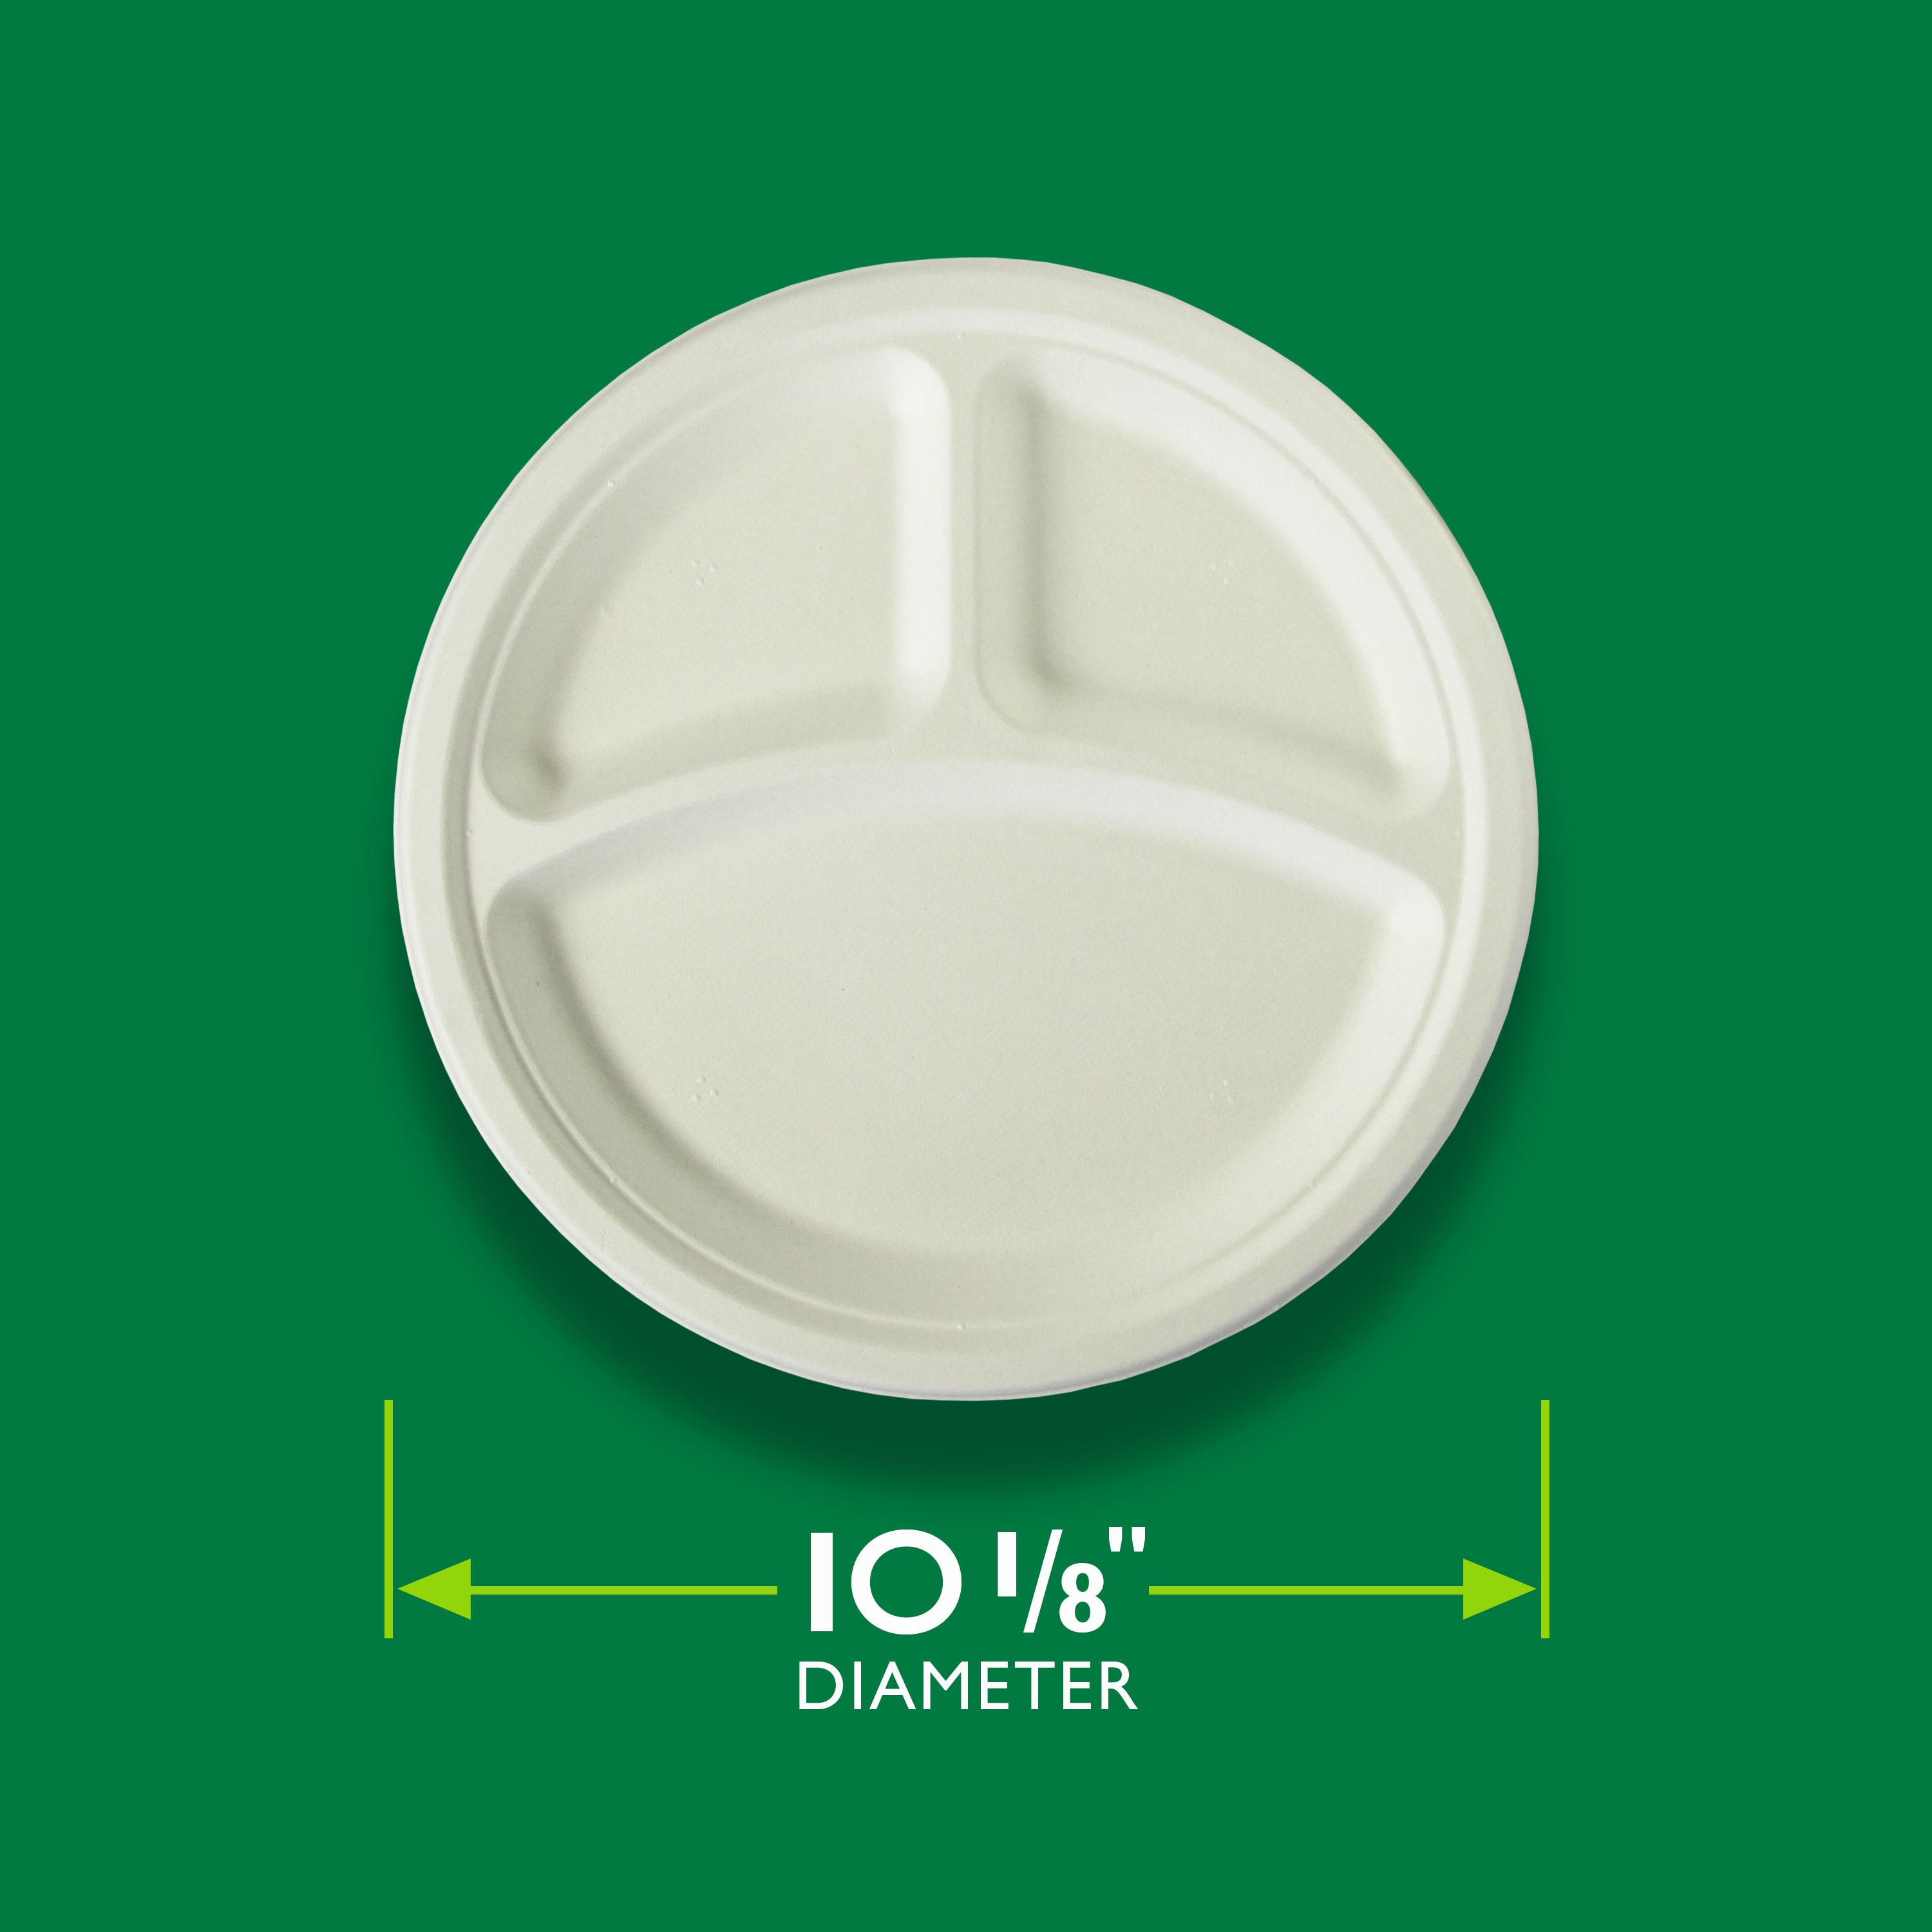 Hefty ECOSAVE Compostable Paper Plates, 10-1/8 inch, 16 Count - image 2 of 7